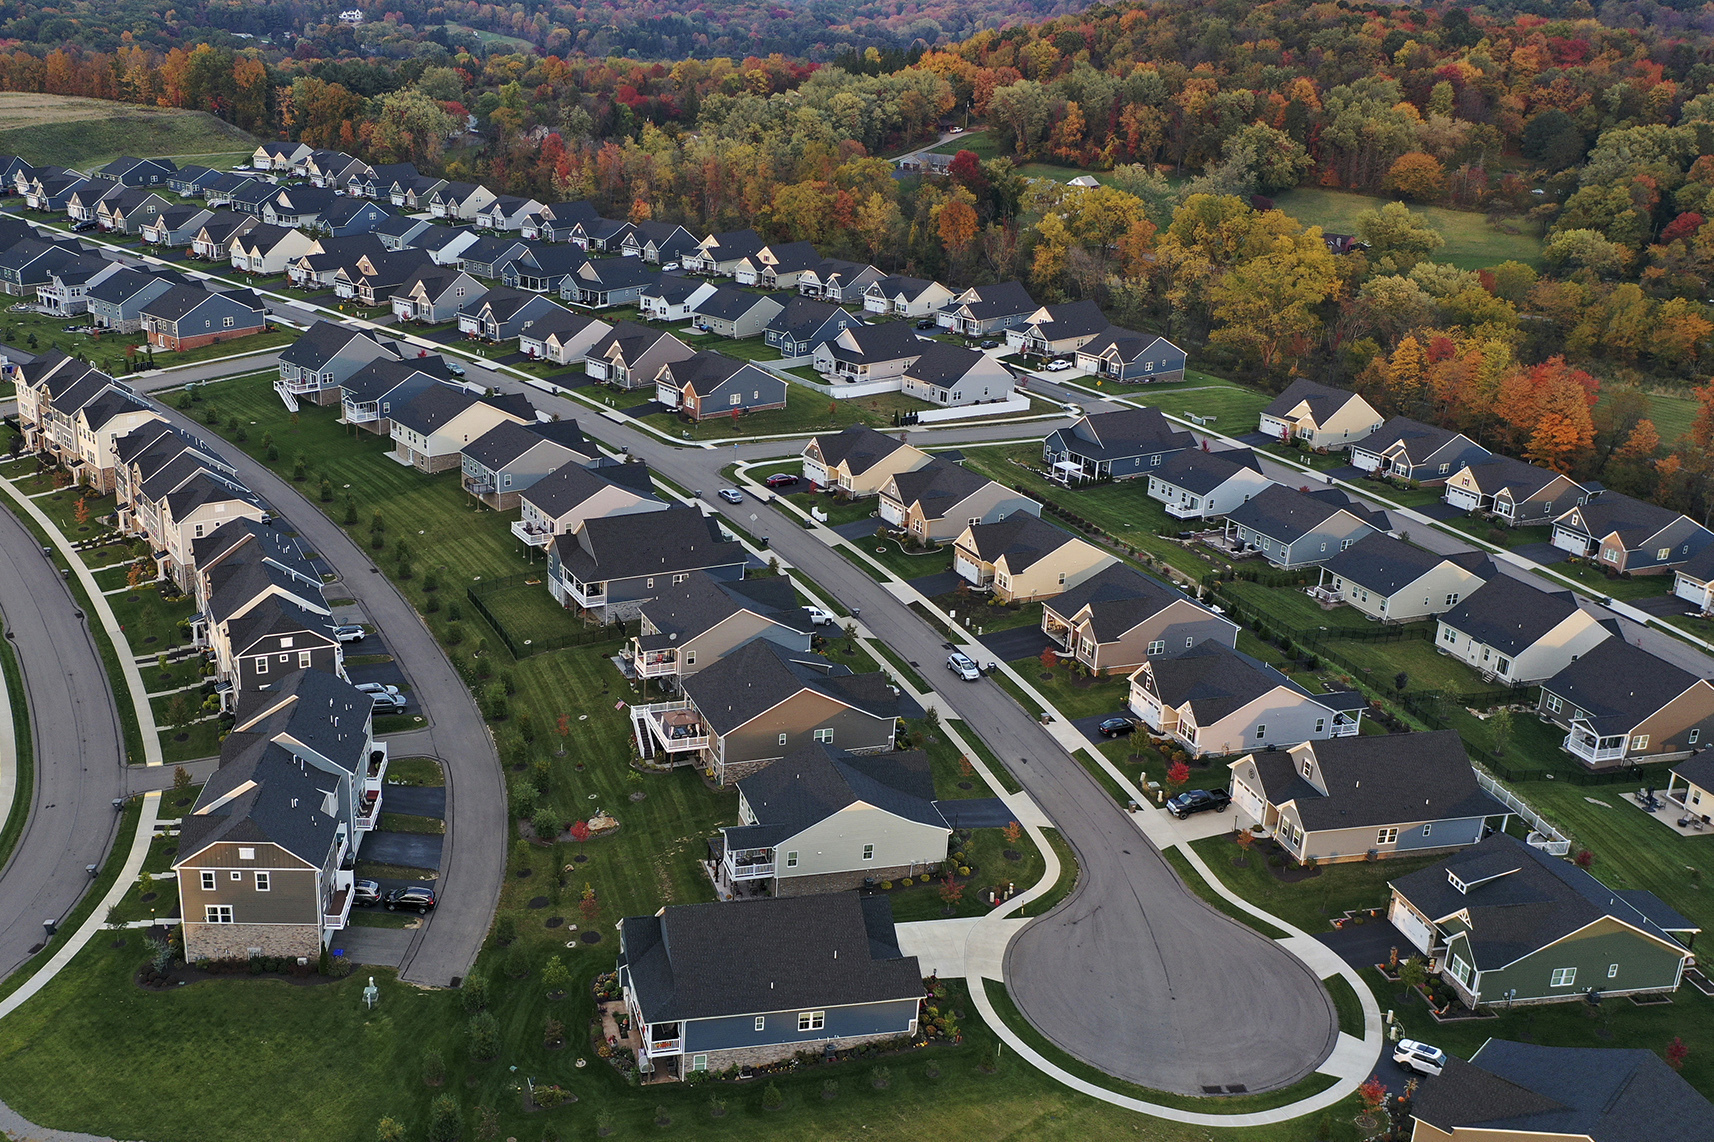 FILE - A new housing development is seen from above, Oct. 12, 2022, in Middlesex Township, Pa. Real estate brokerage company Compass Inc. will pay $57.5 million as part of a proposed settlement to resolve lawsuits over real estate commissions, the company said in a regulatory filing Friday, March 22, 2024. (AP Photo/Gene J. Puskar, File)